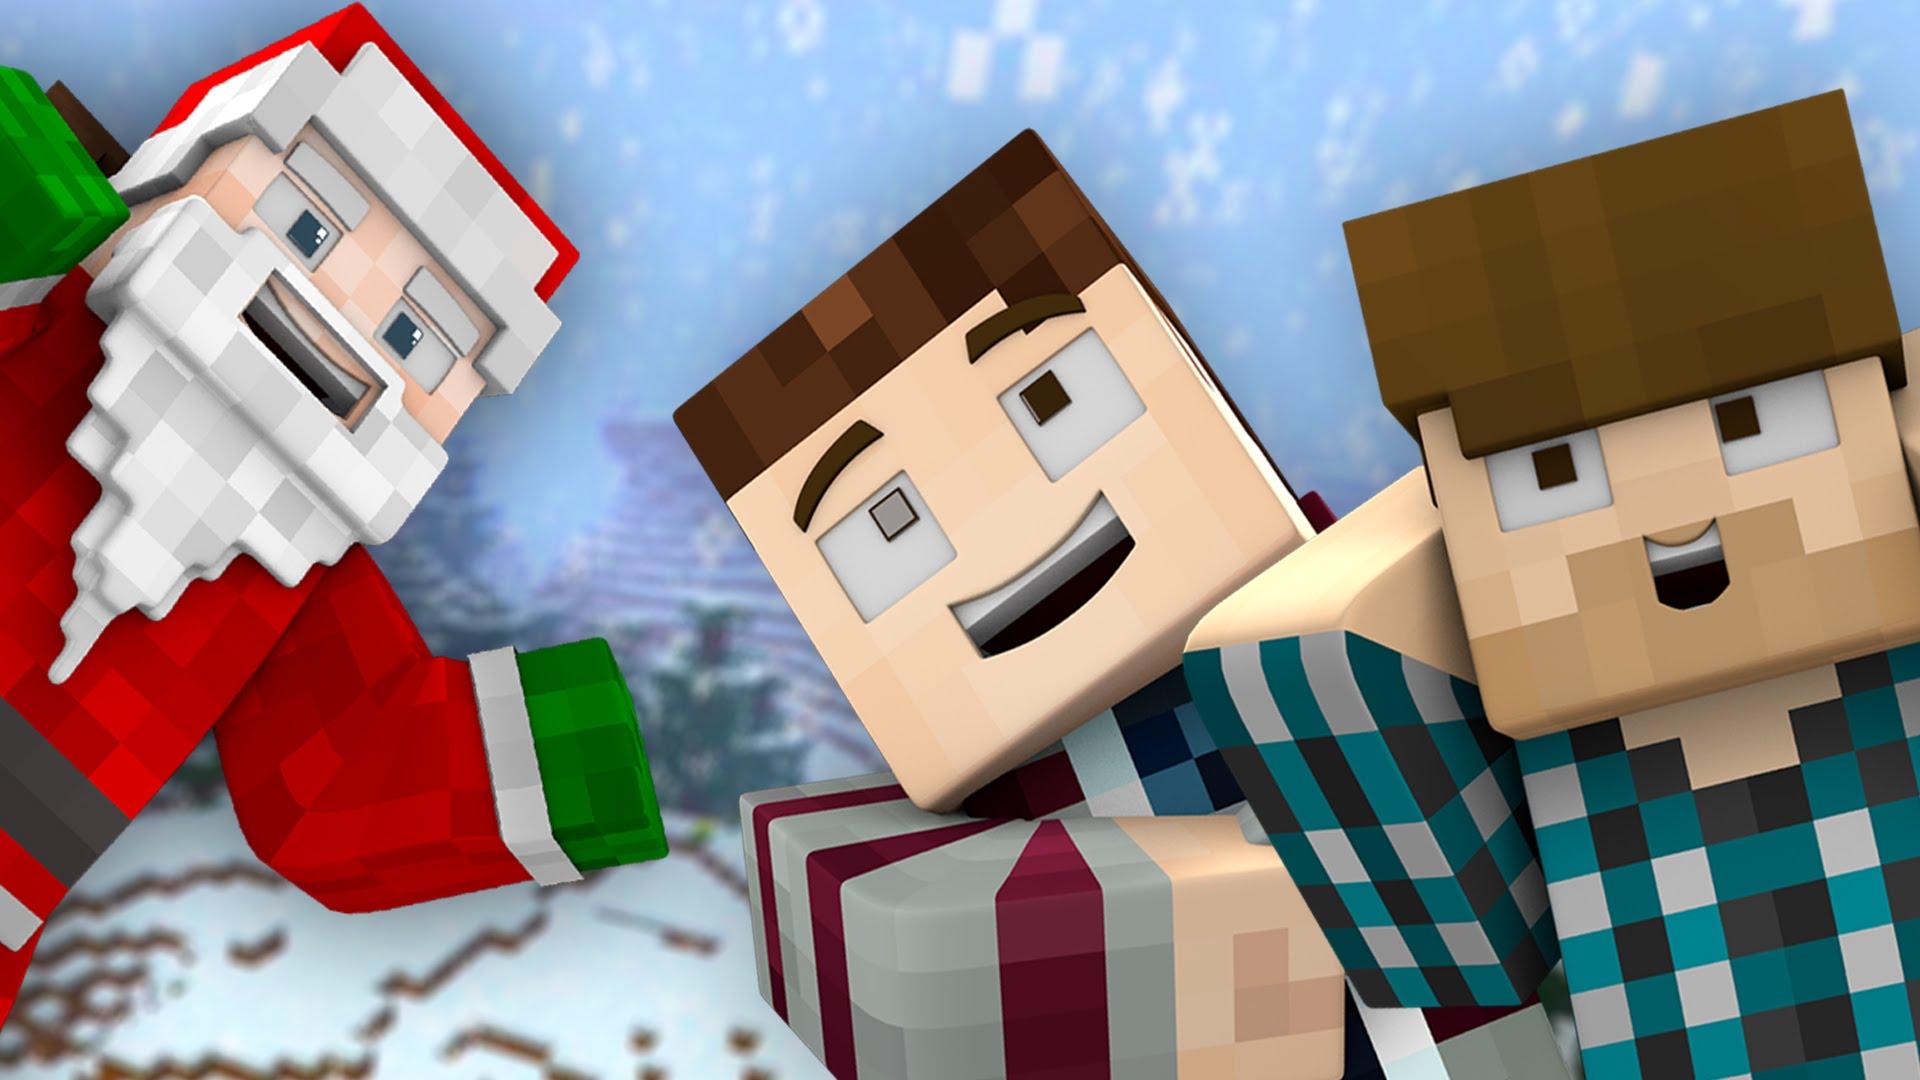 A Merry Minecraft Christmas Wallpaper free Download